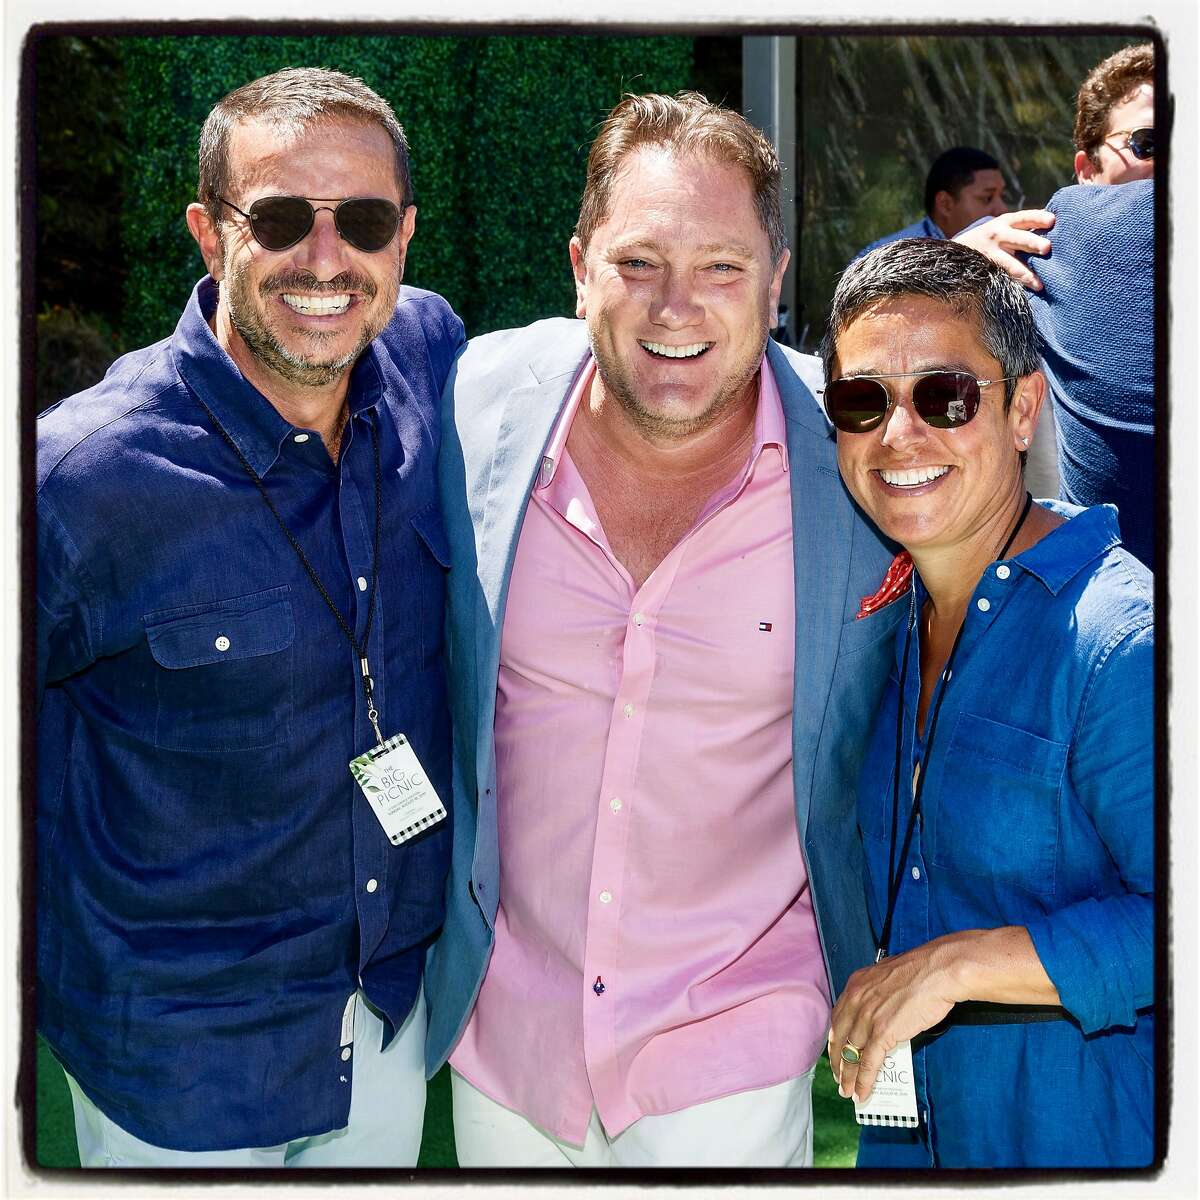 SAN FRANCISCO, CA - August 18 - Phil Ginsburg, Liam Mayclem and Emiliy Ginsburg attend Stern Grove Festival's The Big Picnic 2019 starring The Isley Brothers on August 18th 2019 at Sigmund Stern Grove in San Francisco, CA (Photo - Devlin Shand for Drew Altizer Photography)